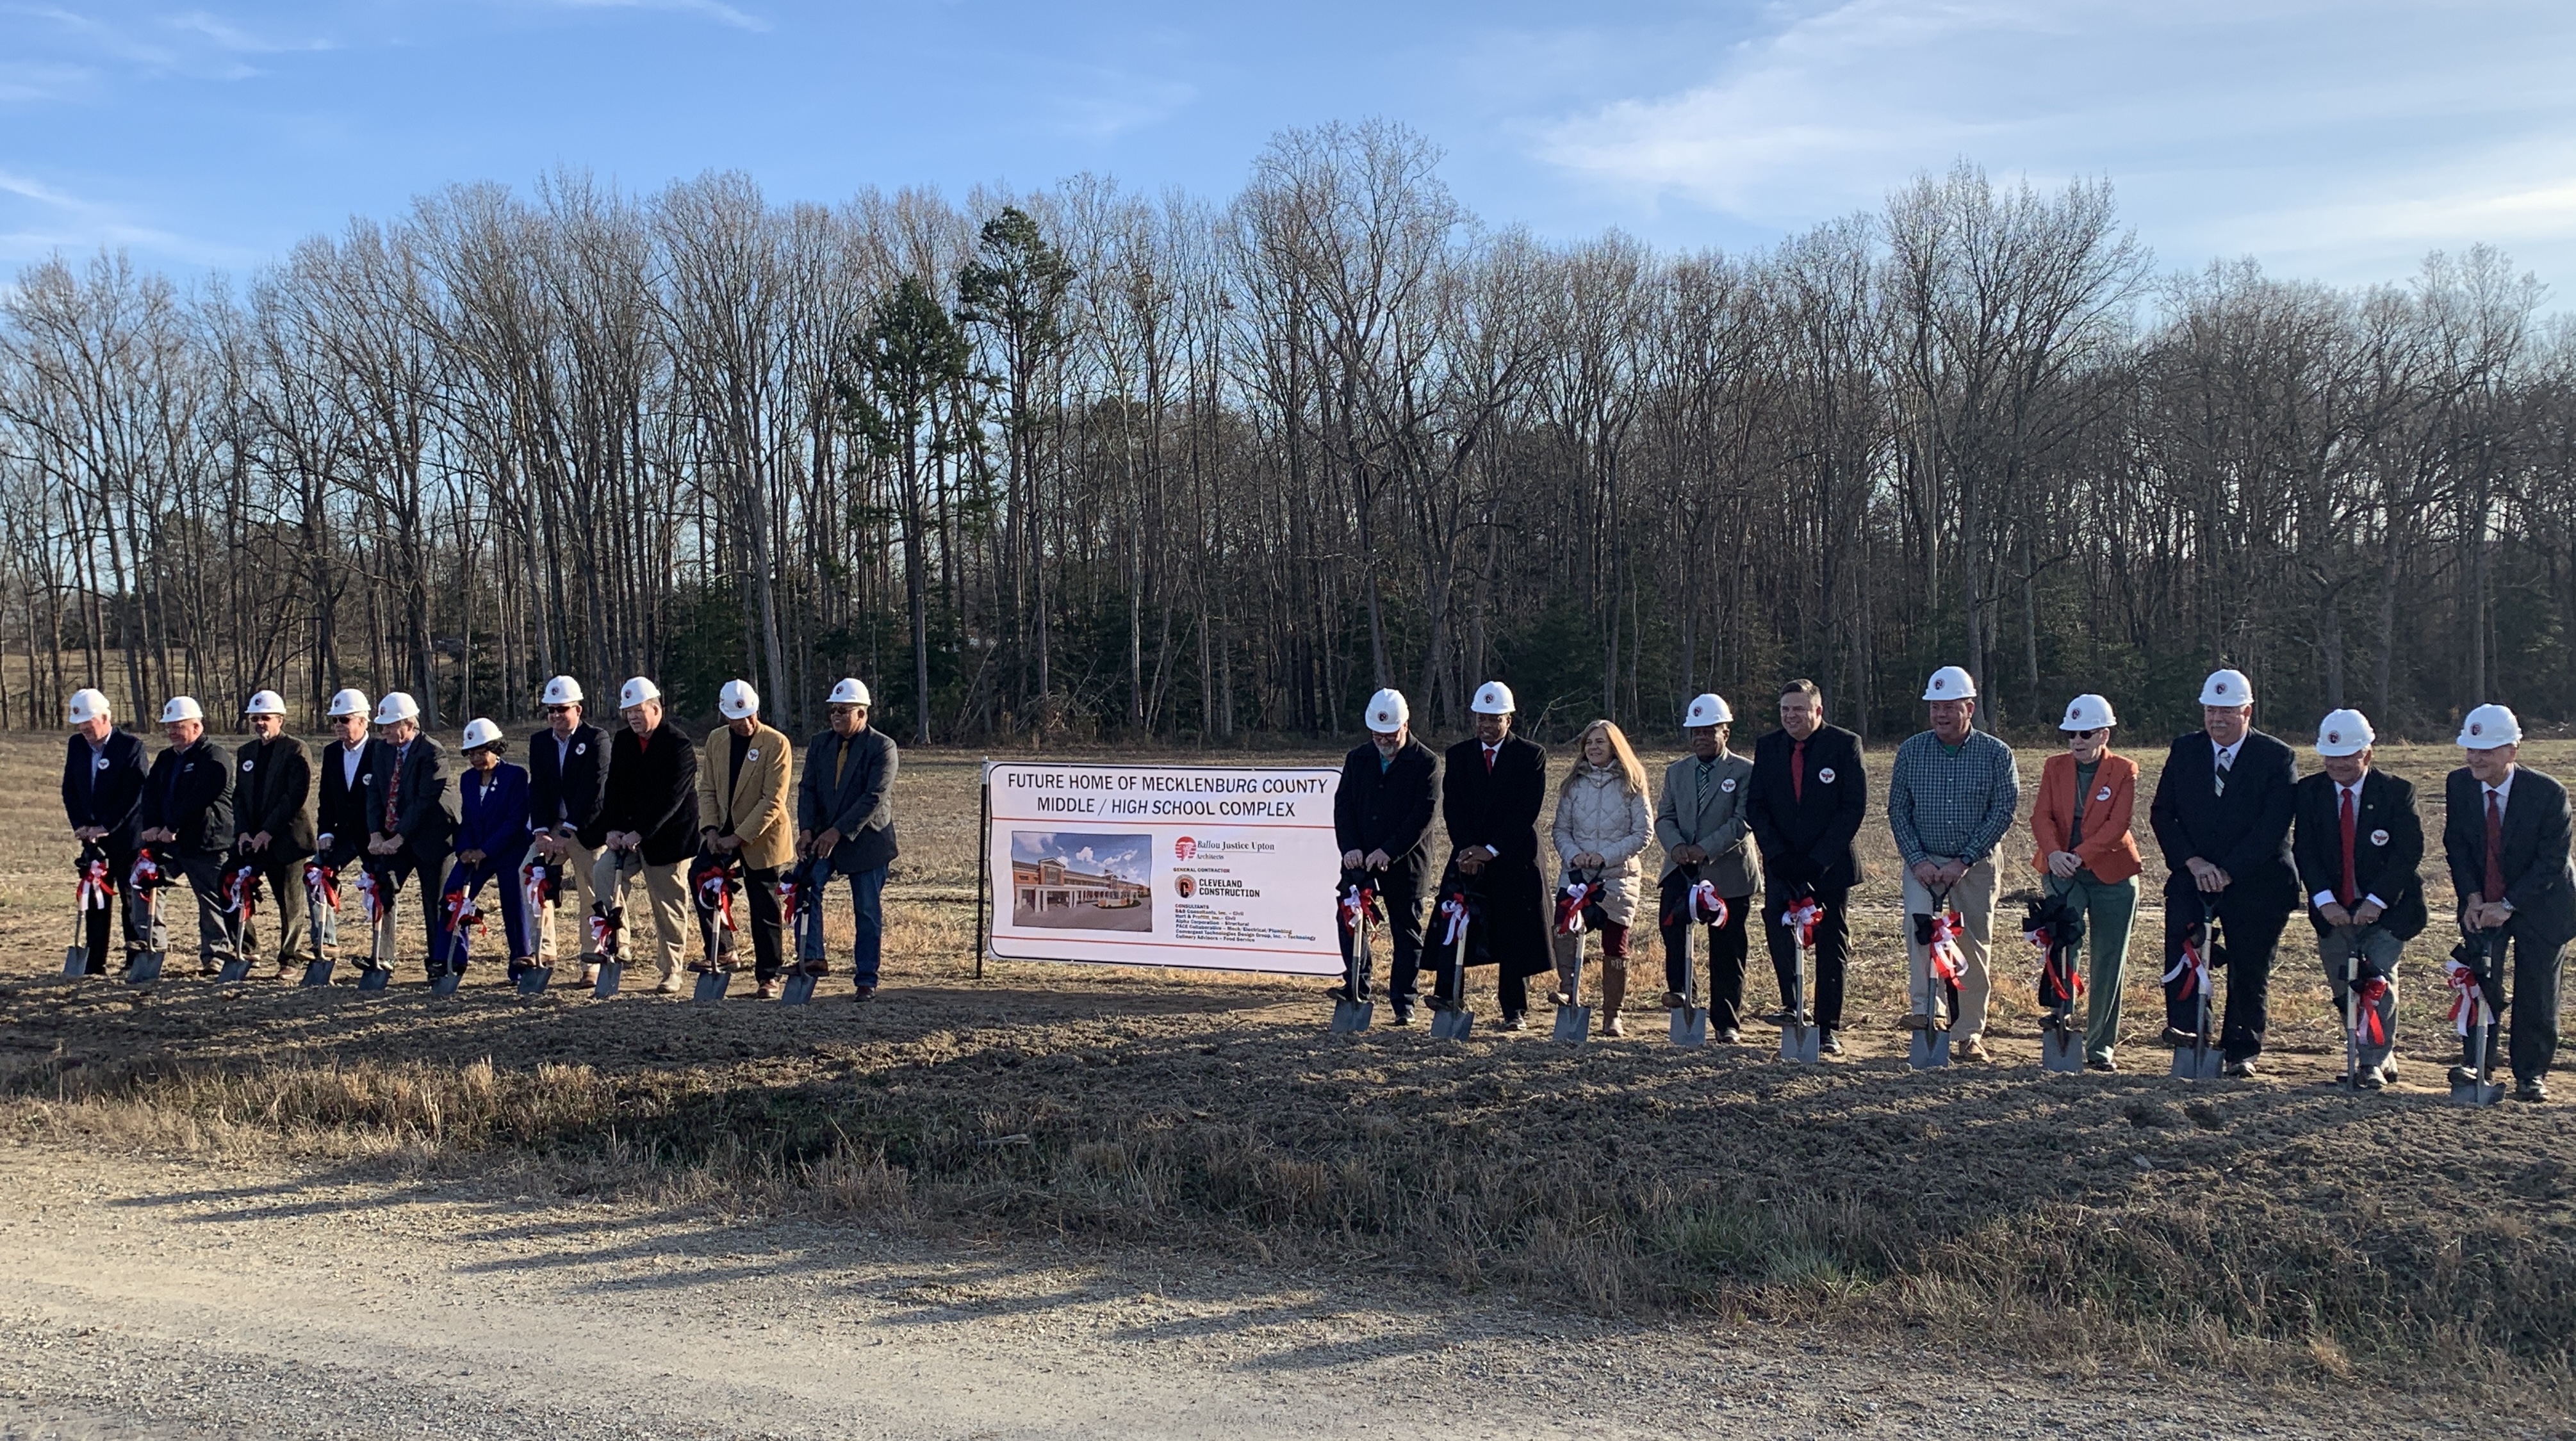 Cleveland Construction Breaks Ground On New Mecklenburg Middle/High School Complex In Virginia